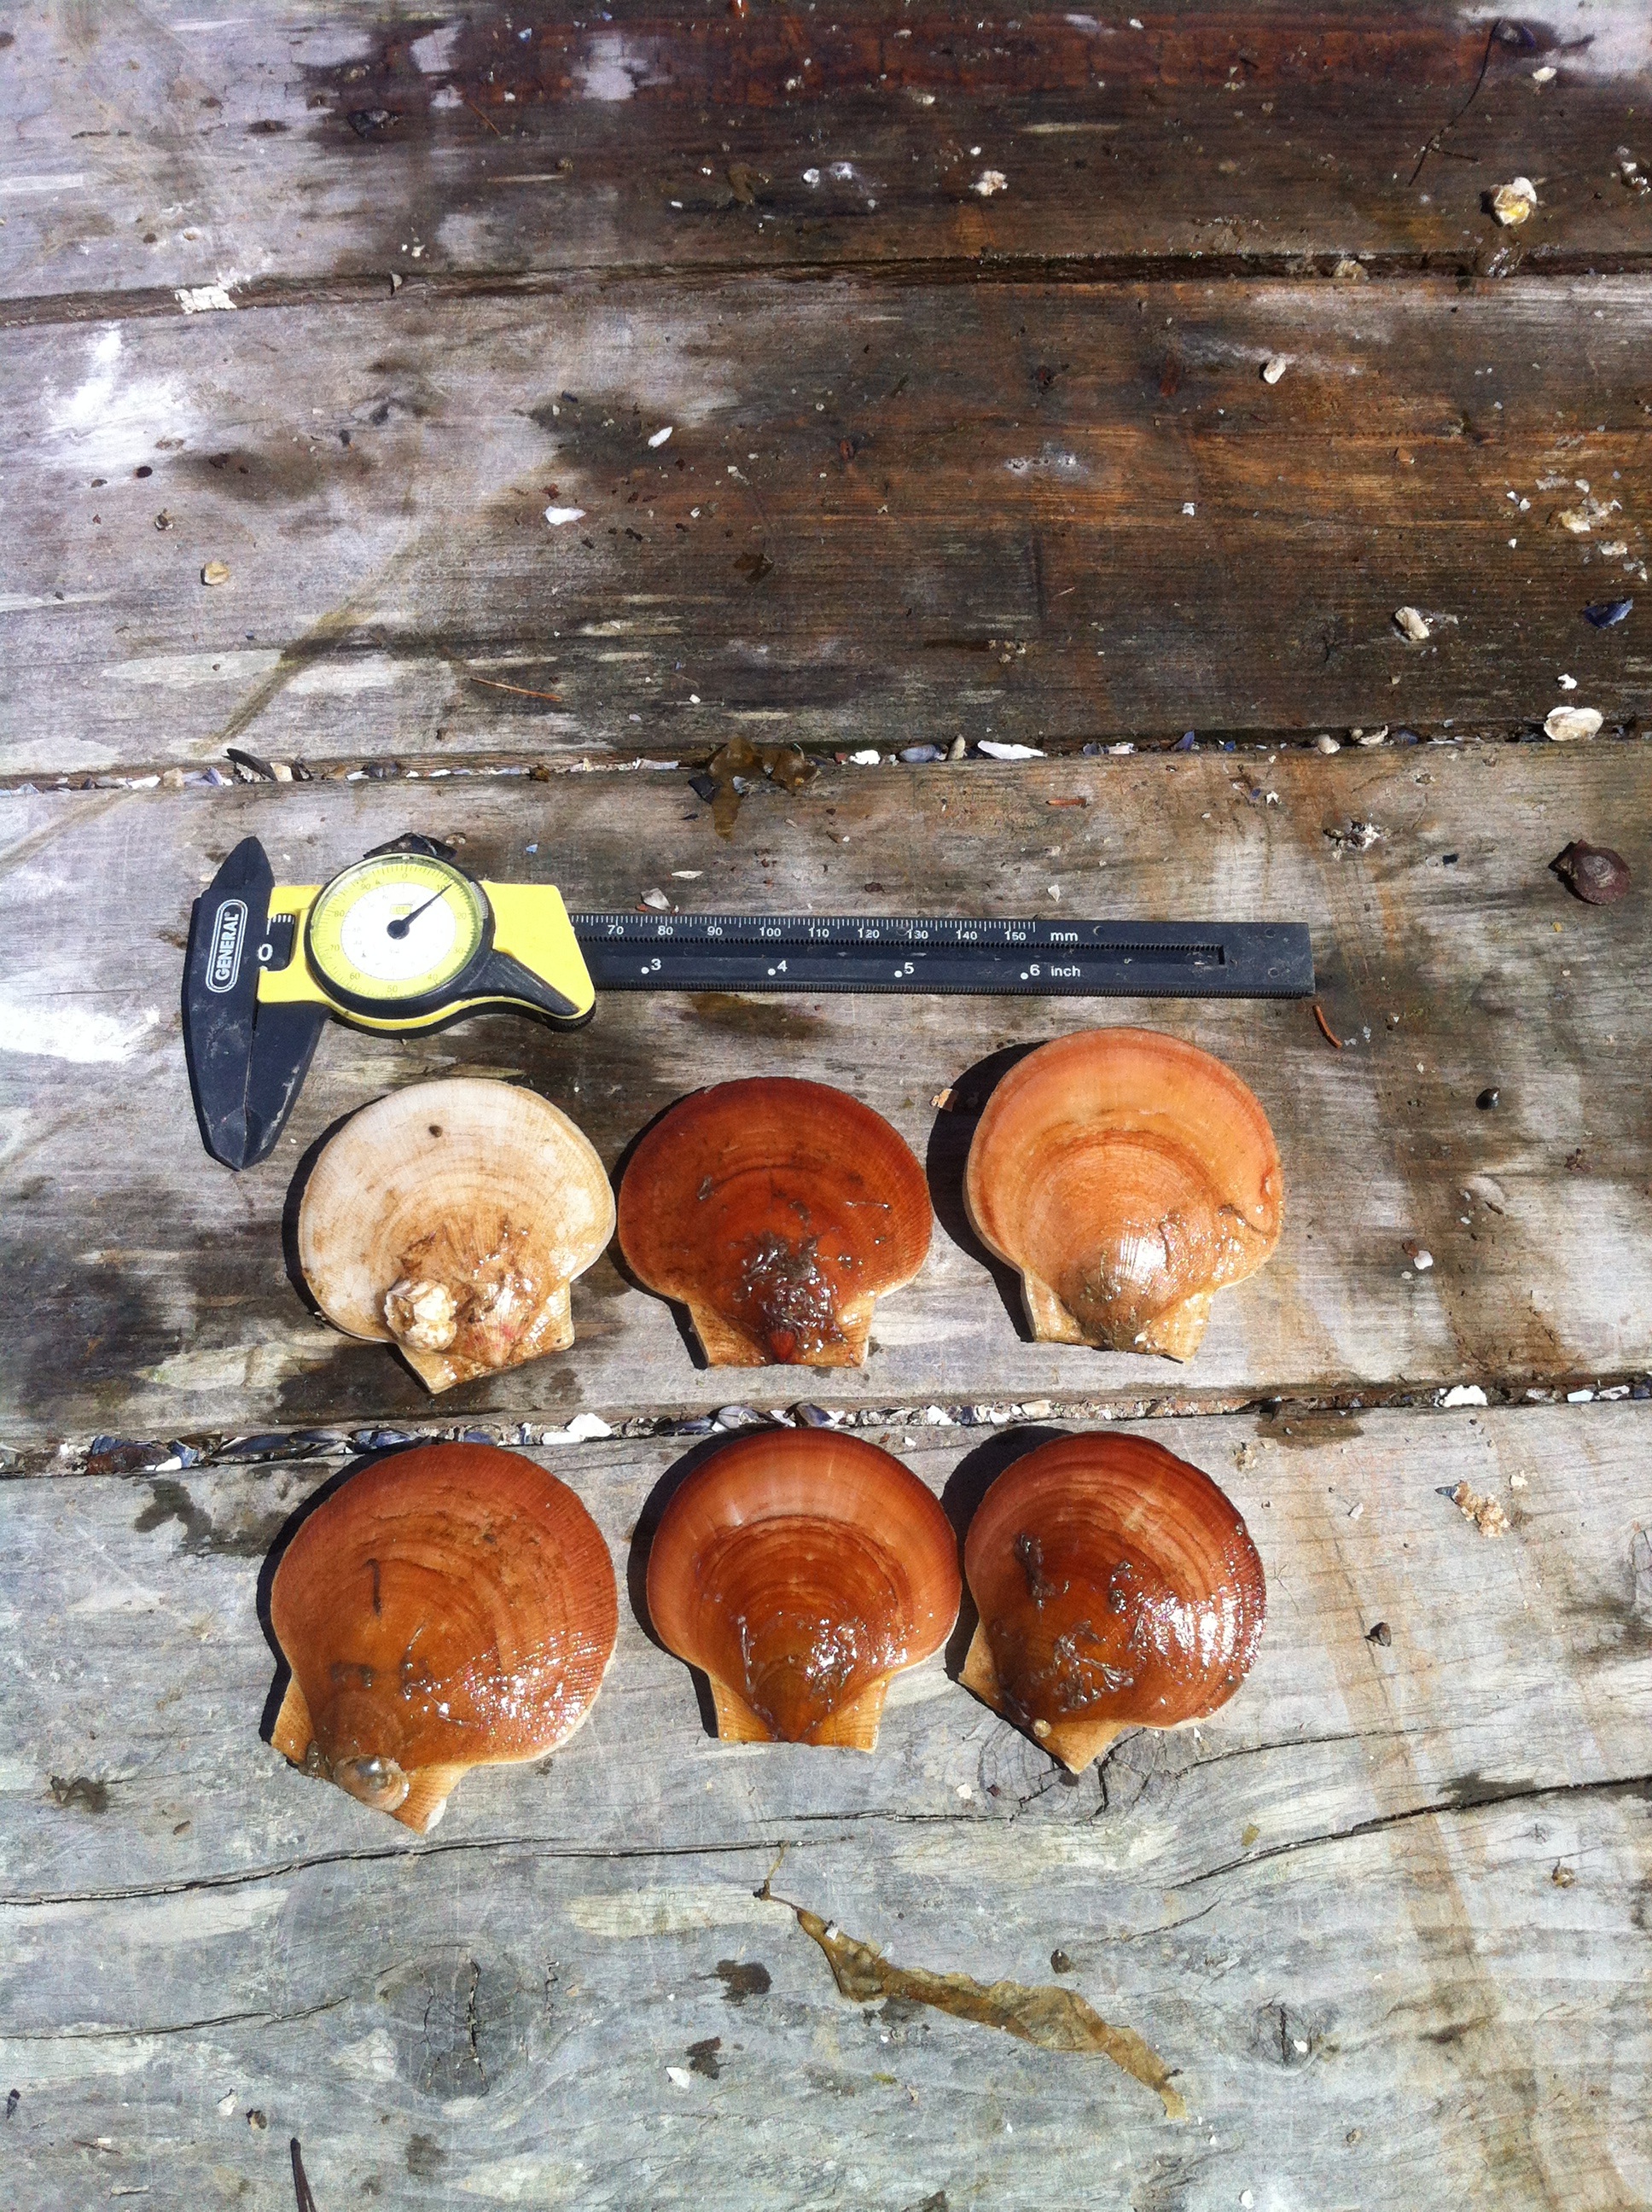 Six scallops on wooden dock with measuring tool